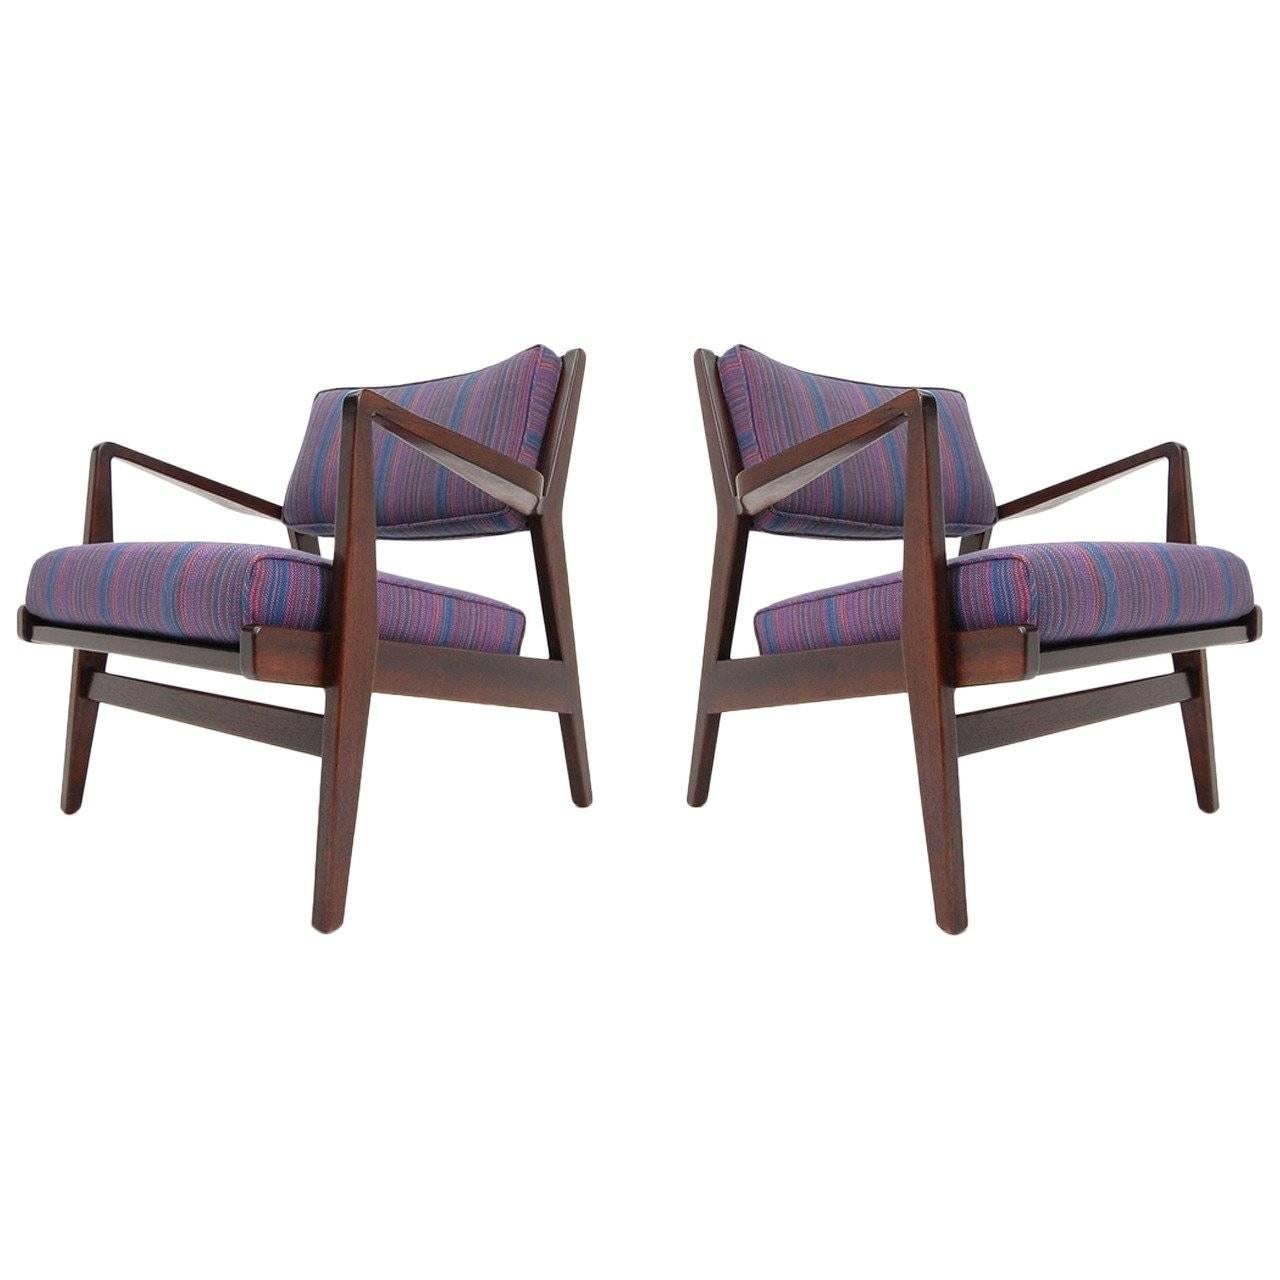 Pair of Jens Risom lounge chairs in walnut, circa 1965. Chairs have been completely refinished in a dark walnut and reupholstered, including new foam. Measures: Width 27